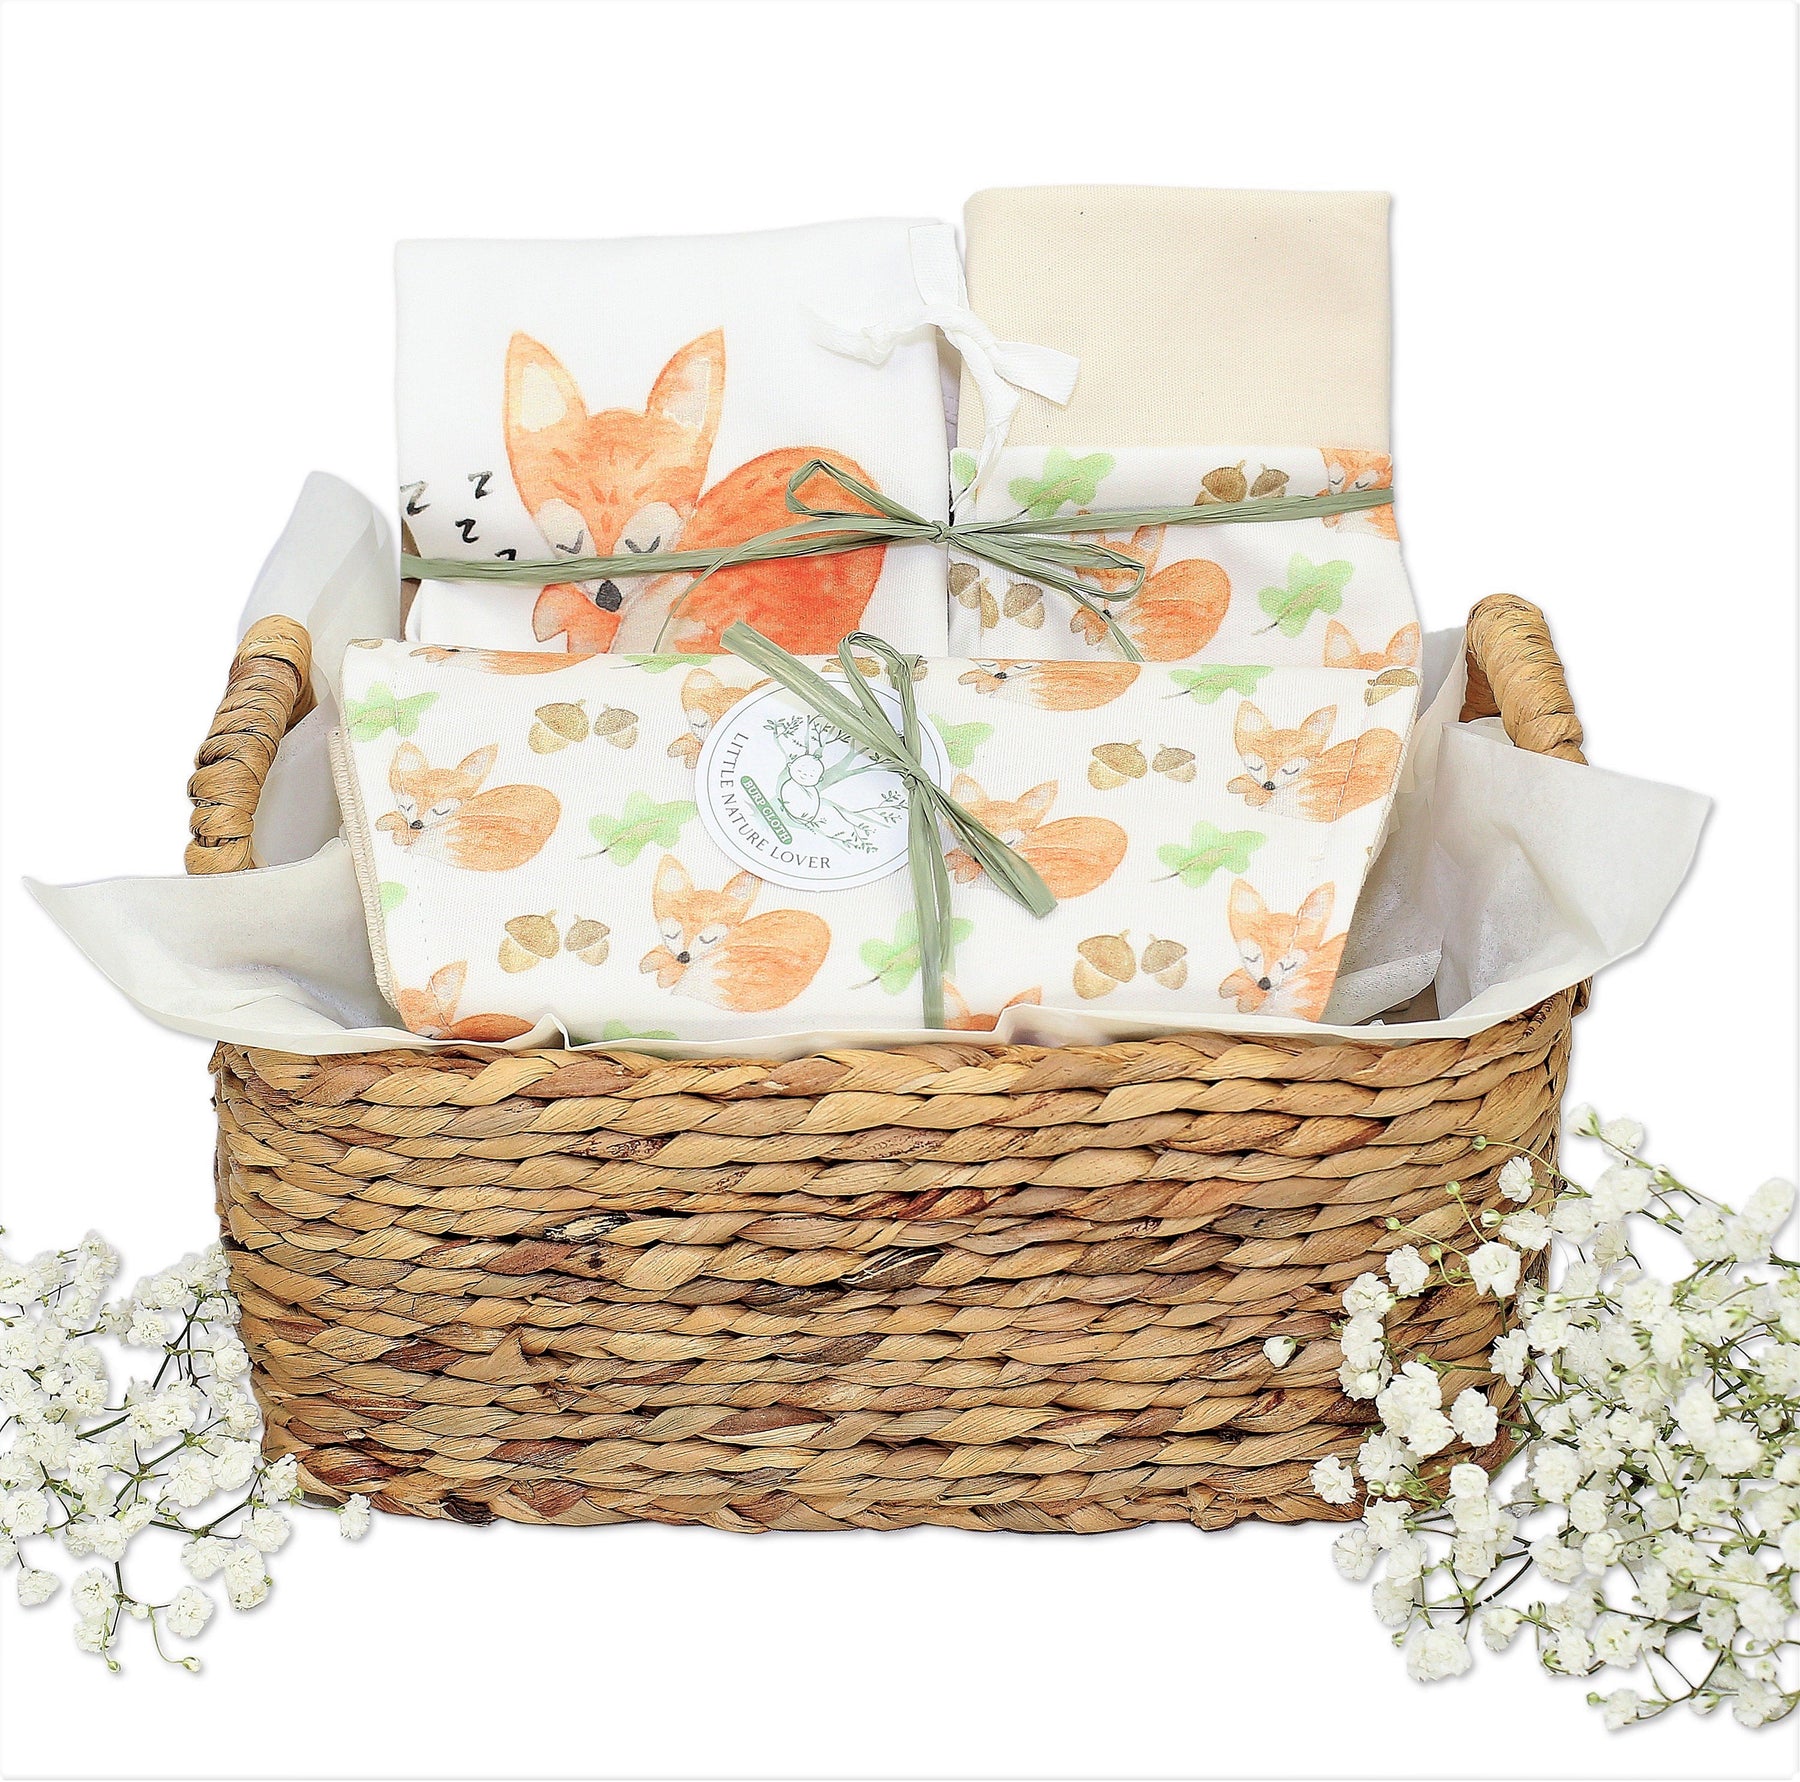 View Our Adorable Gender Neutral Luxury Baby Gift Baskets! - MY BASKETS